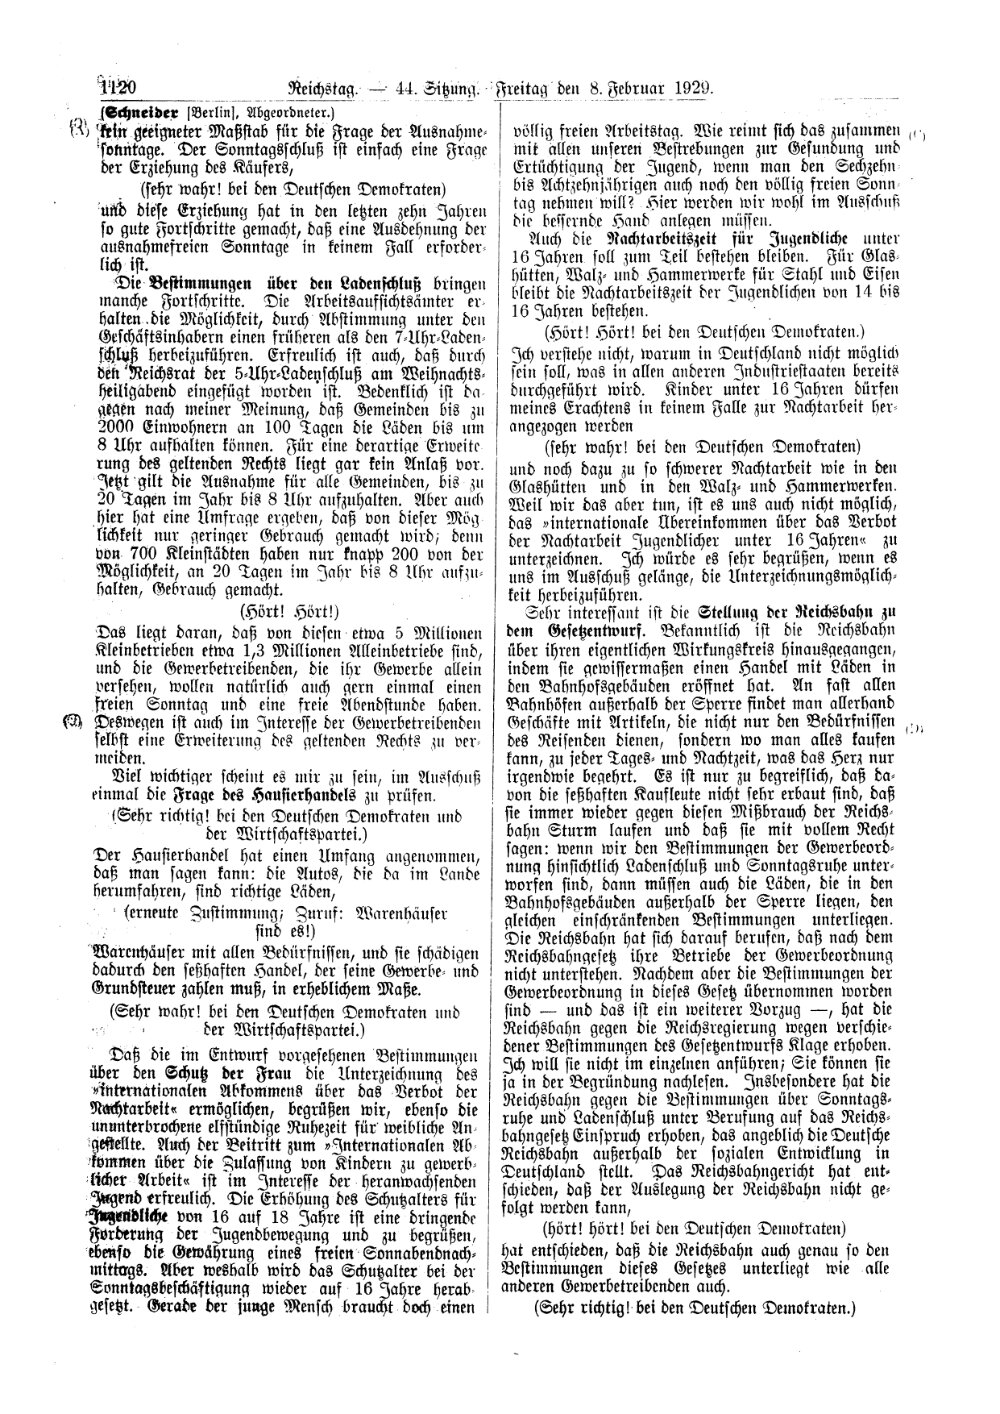 Scan of page 1120